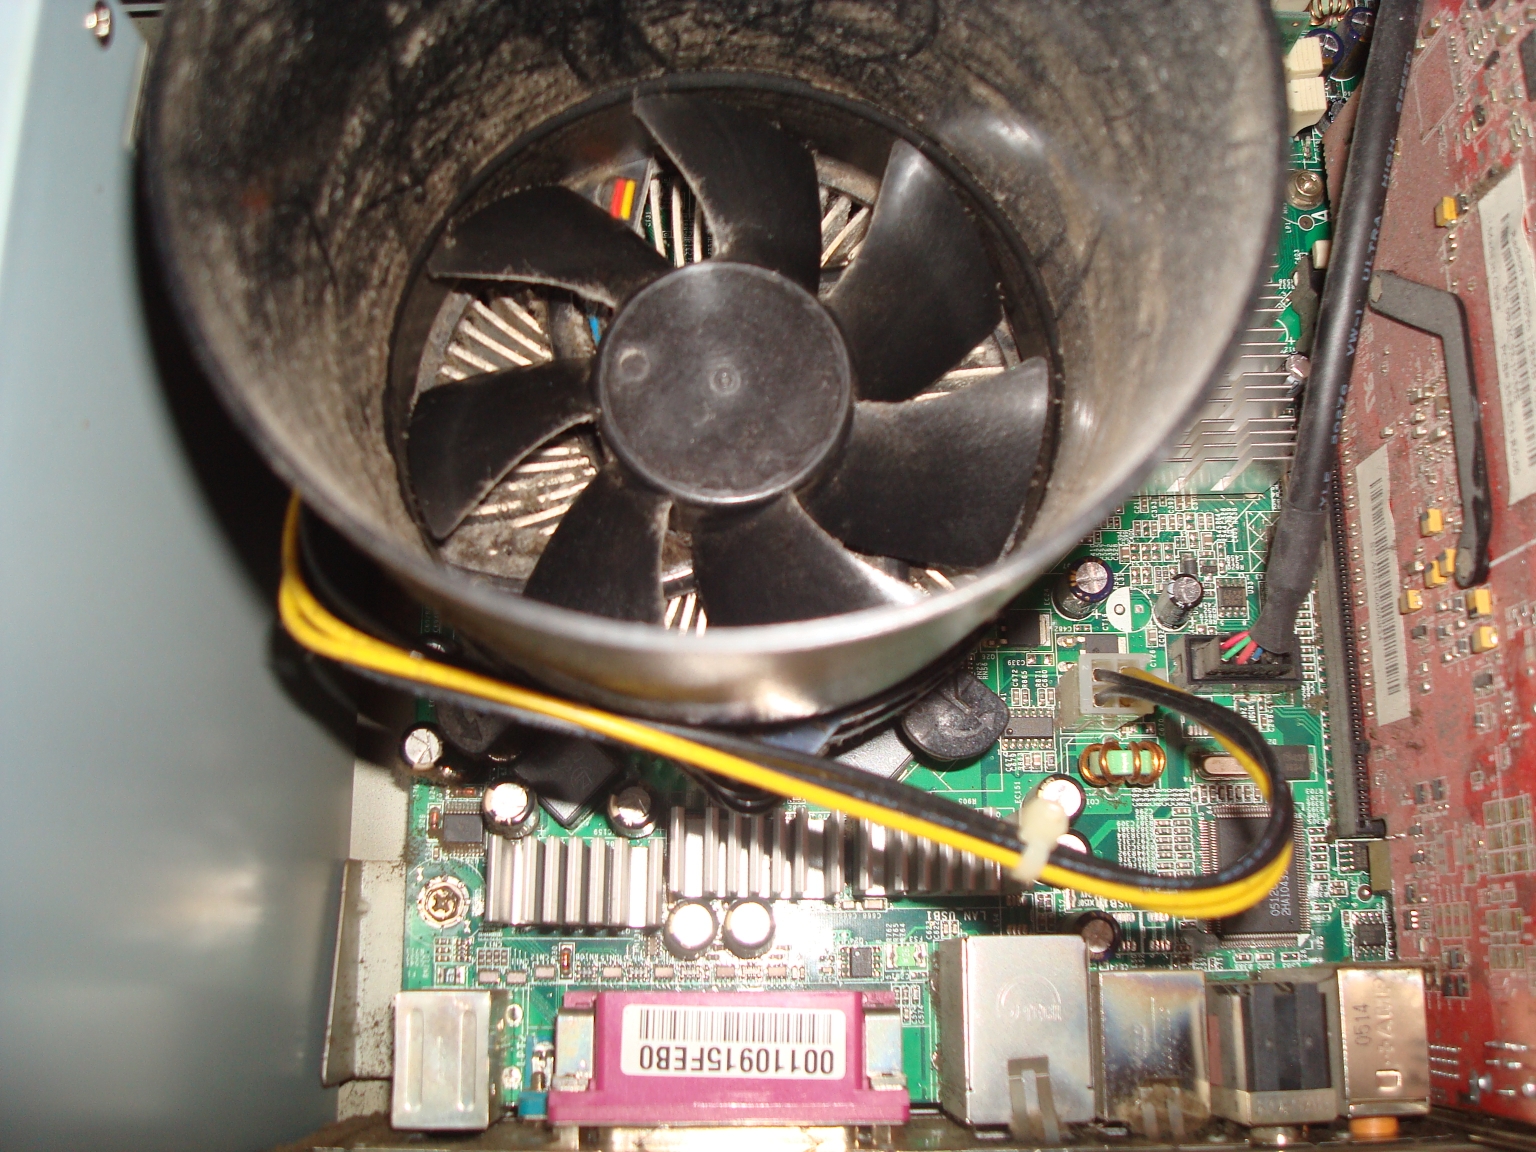 the fan and wires are attached to the motherboard